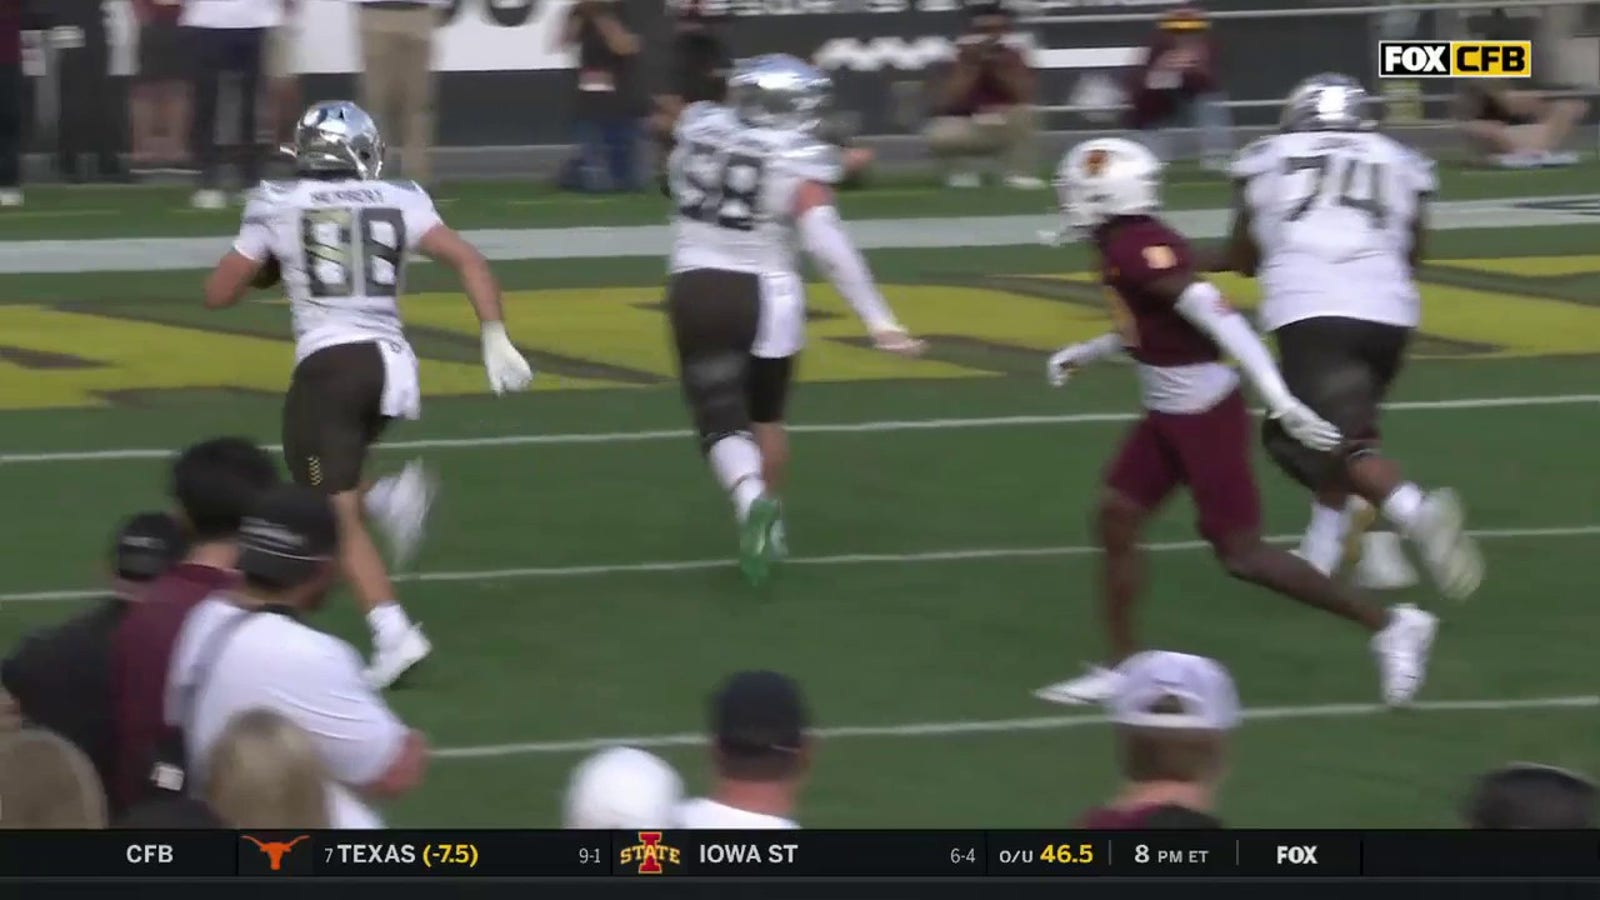 Patrick Herbert goes UNTOUCHED on a 49-yard TD reception to give Oregon a 14-0 lead against Arizona State